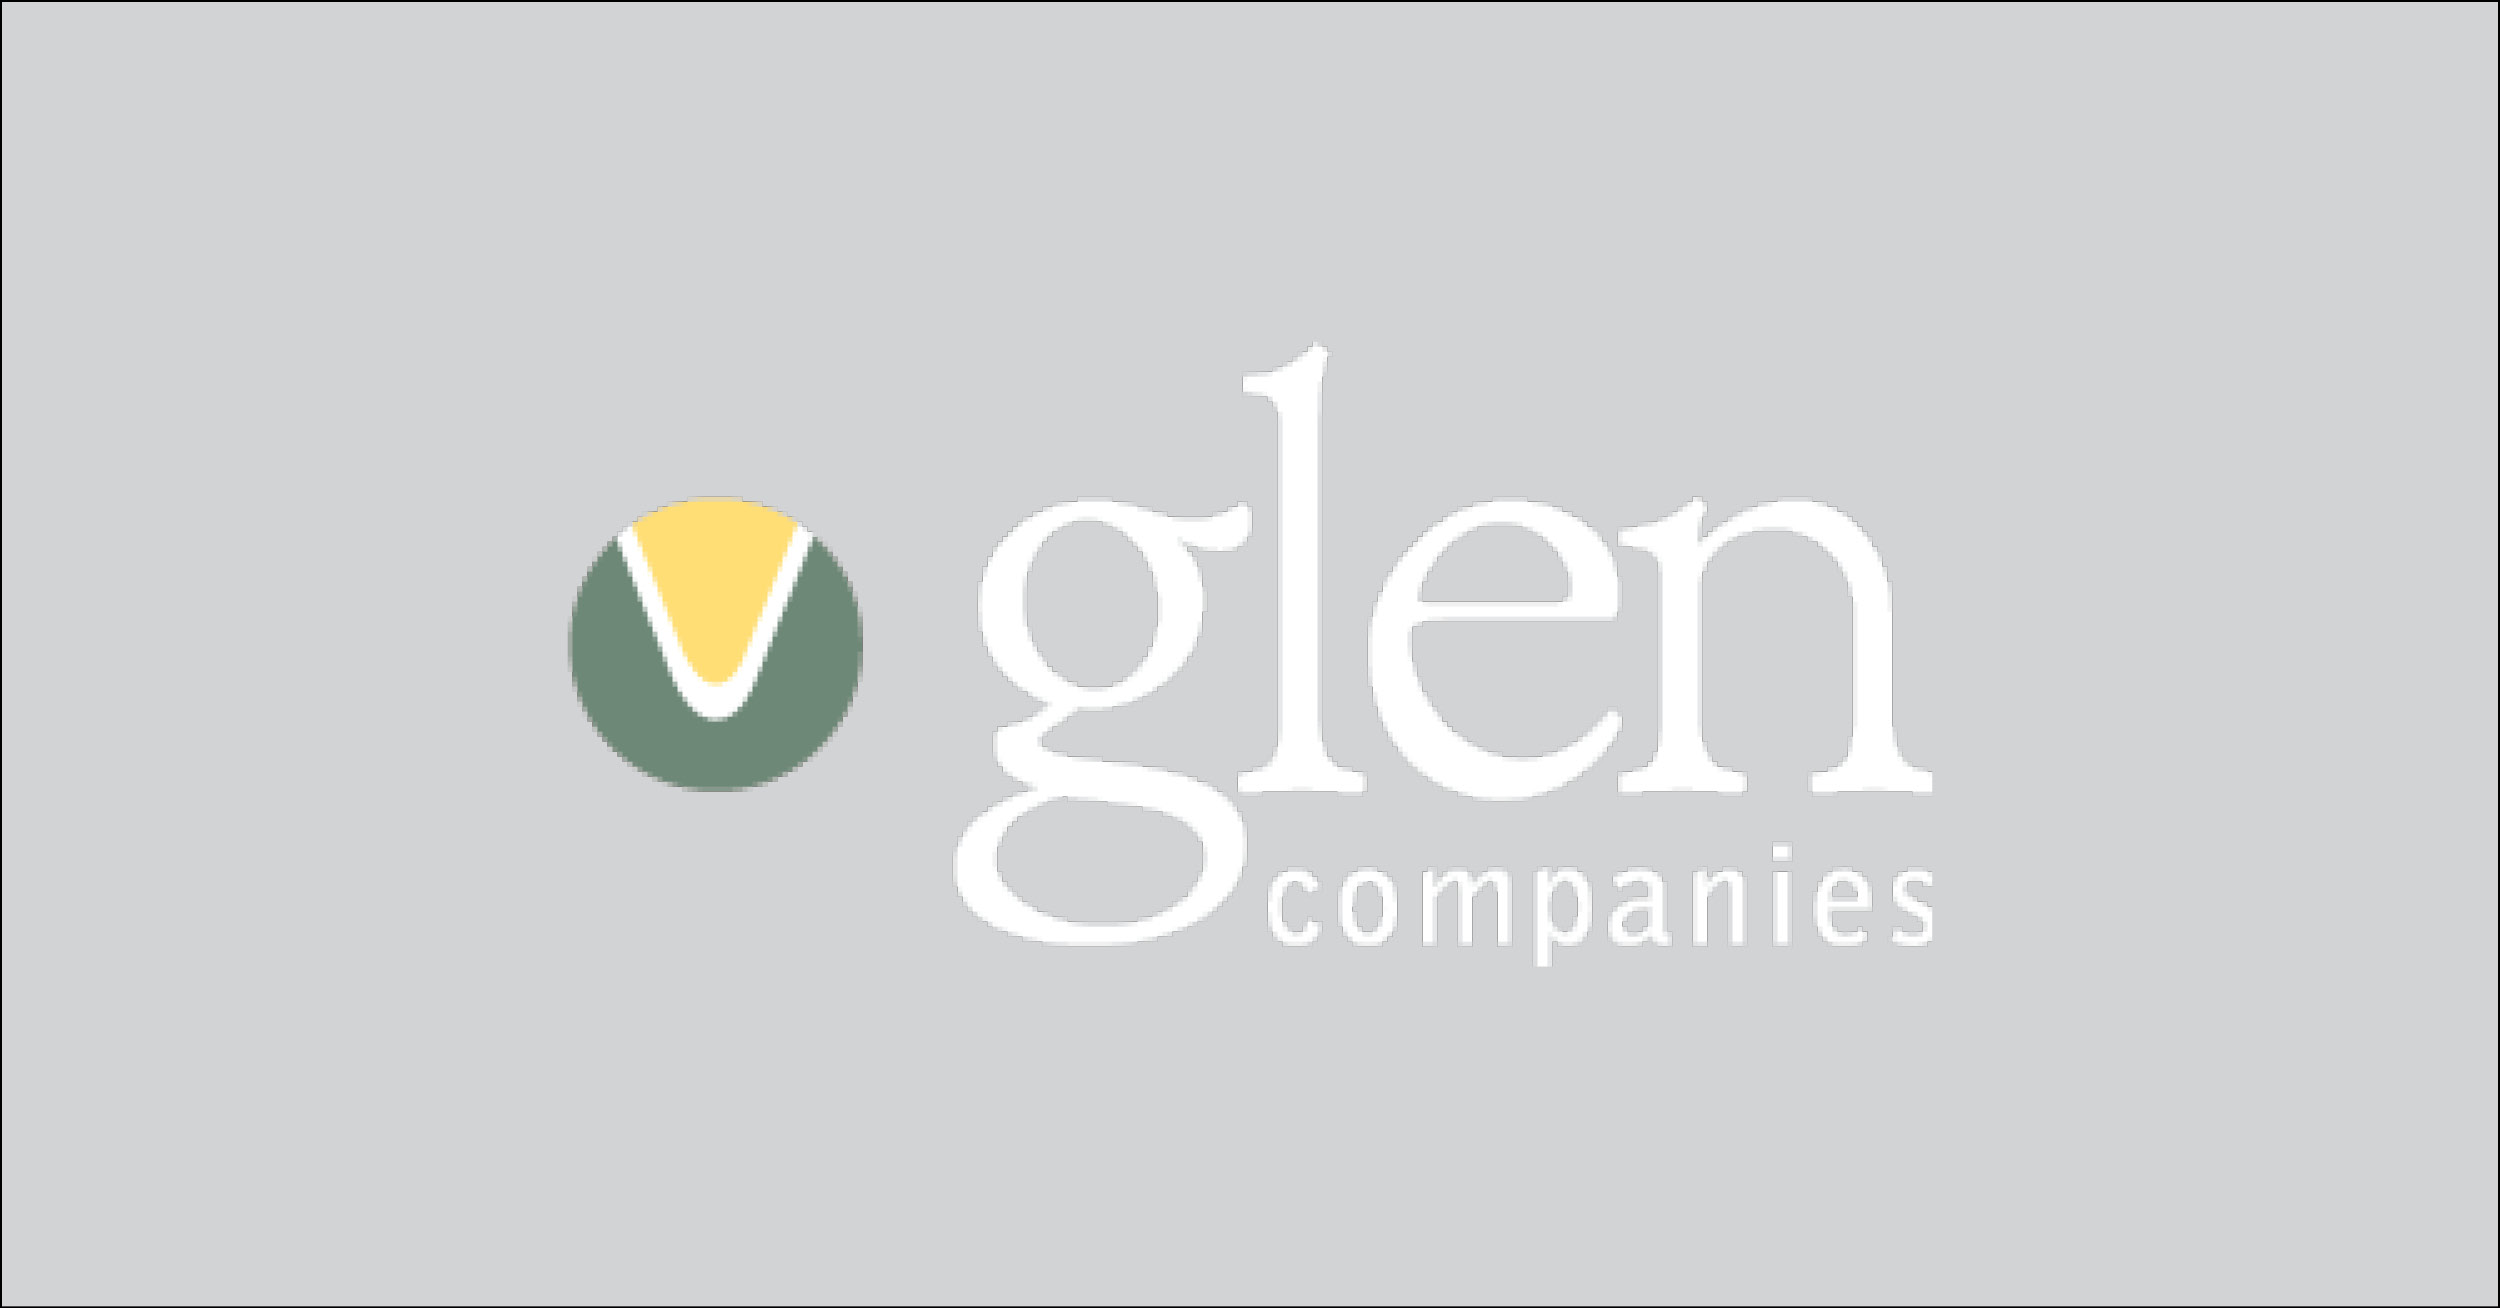 Find new construction or search for new homes and communities by Glen Companies or Glen Homes in Colorado